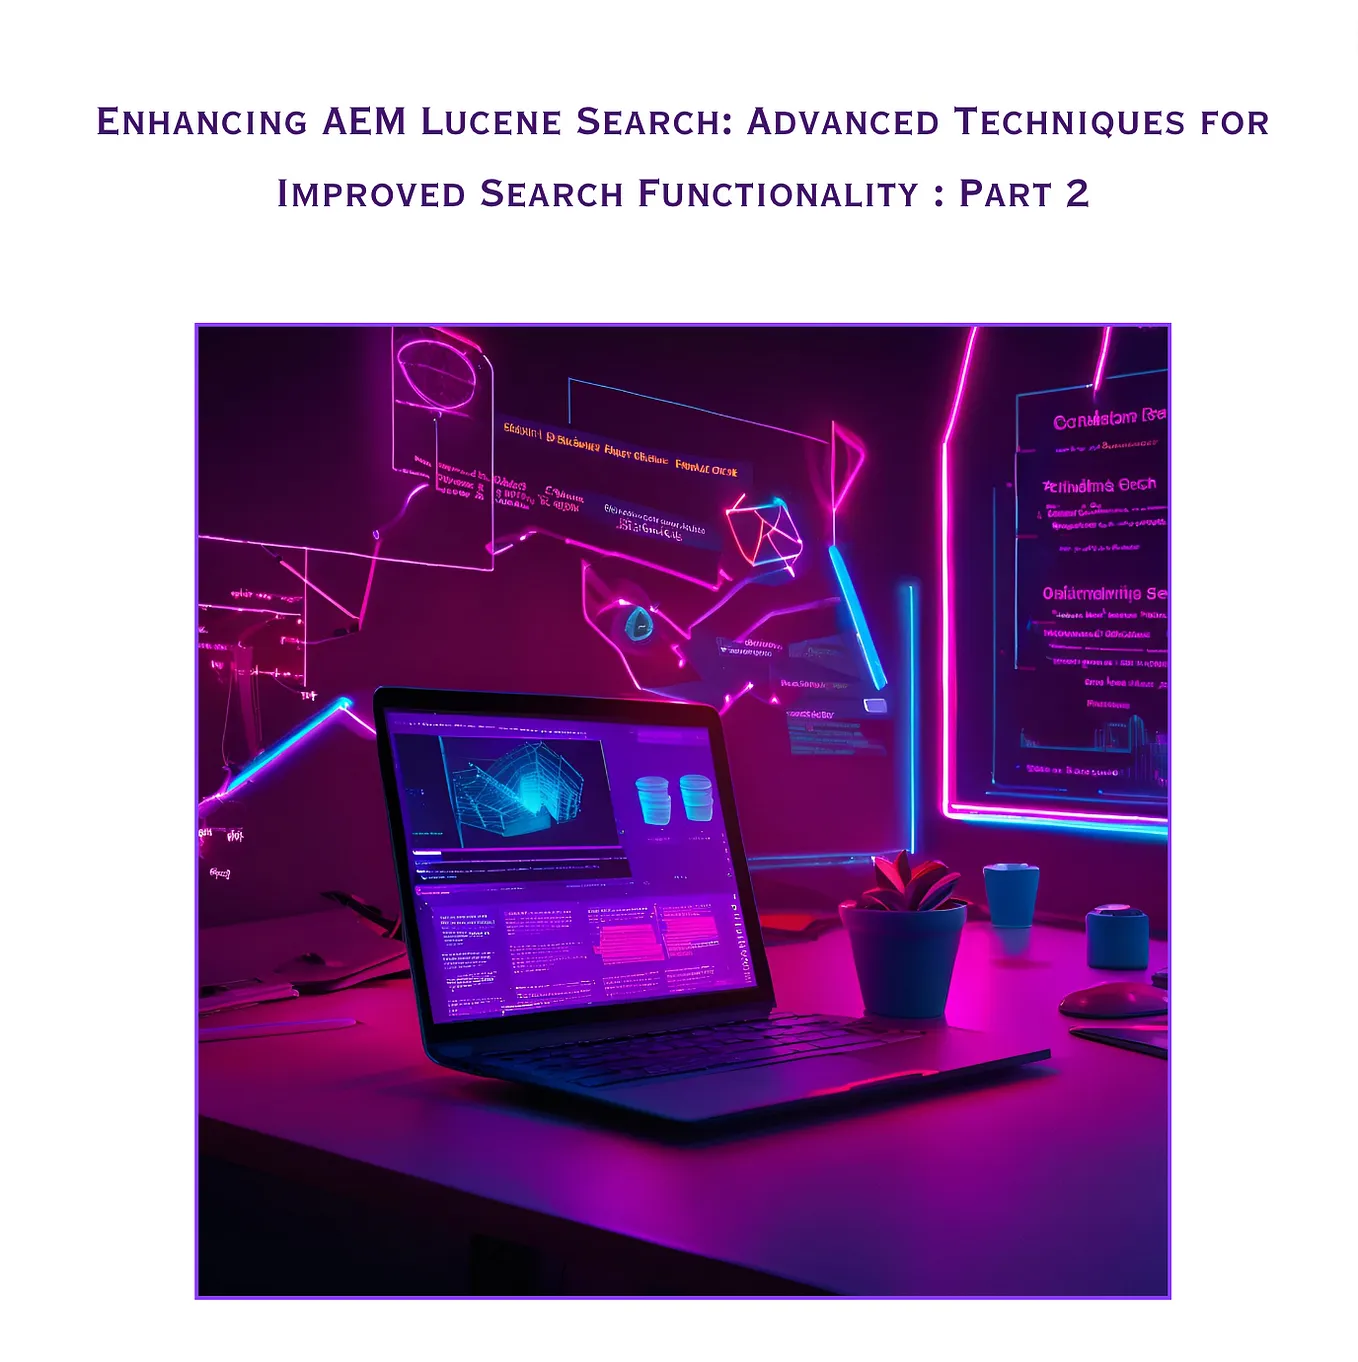 Enhancing AEM Lucene Search: Advanced Techniques for Improved Search Functionality : Part 2